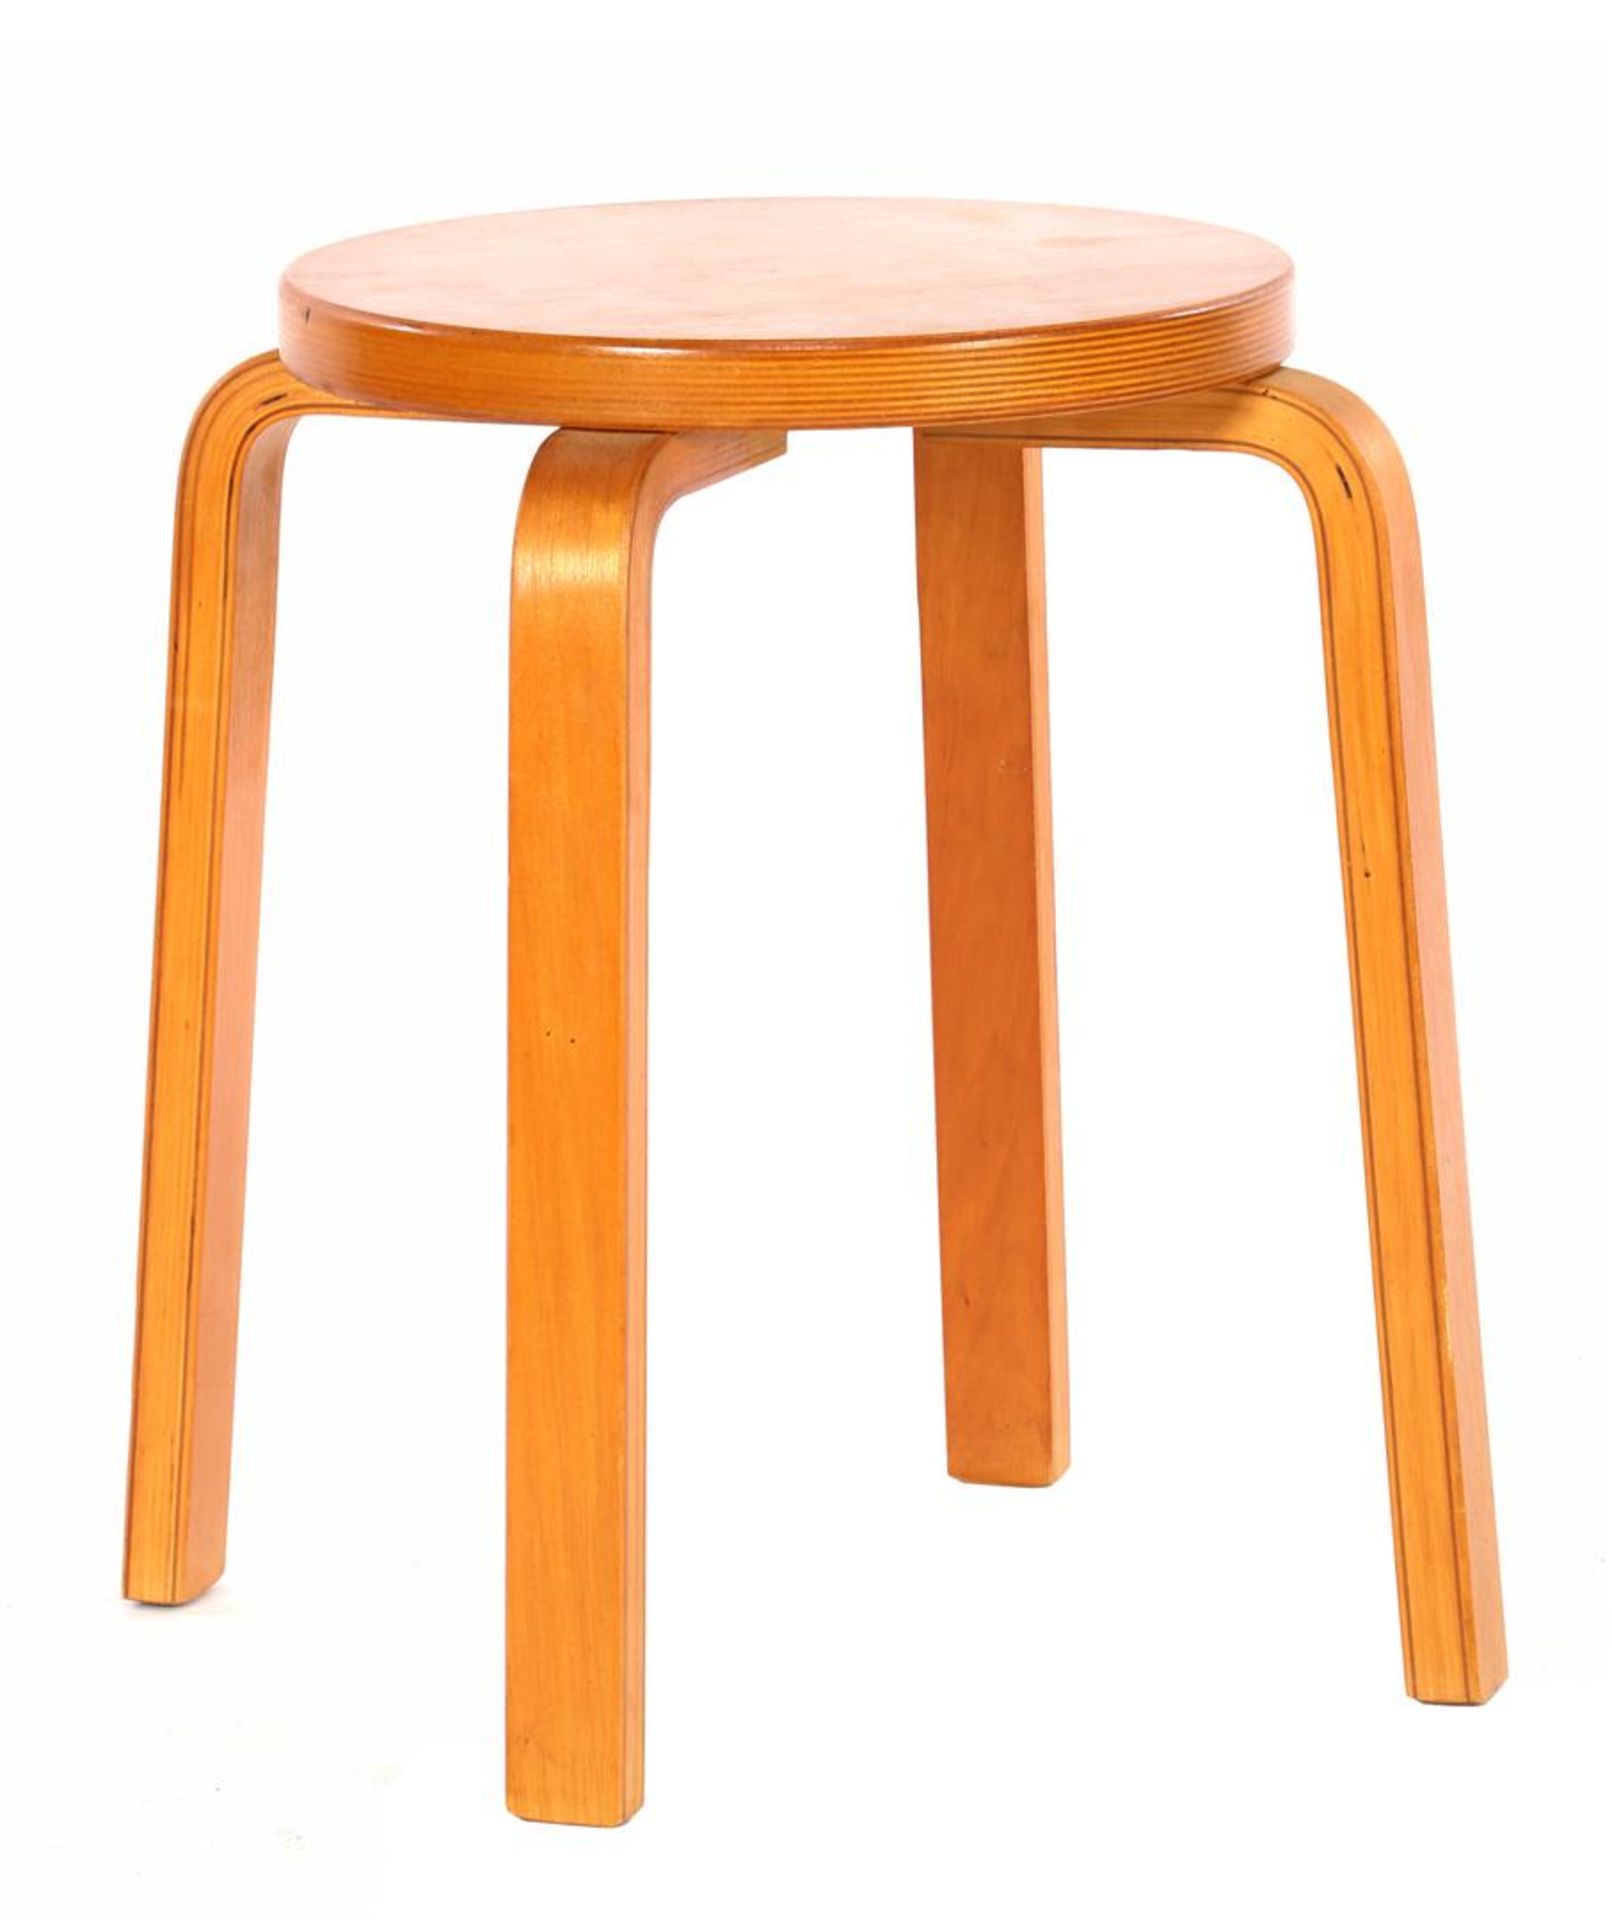 Curved birch wood stool with plywood seat, mid 20th century, 44 cm high